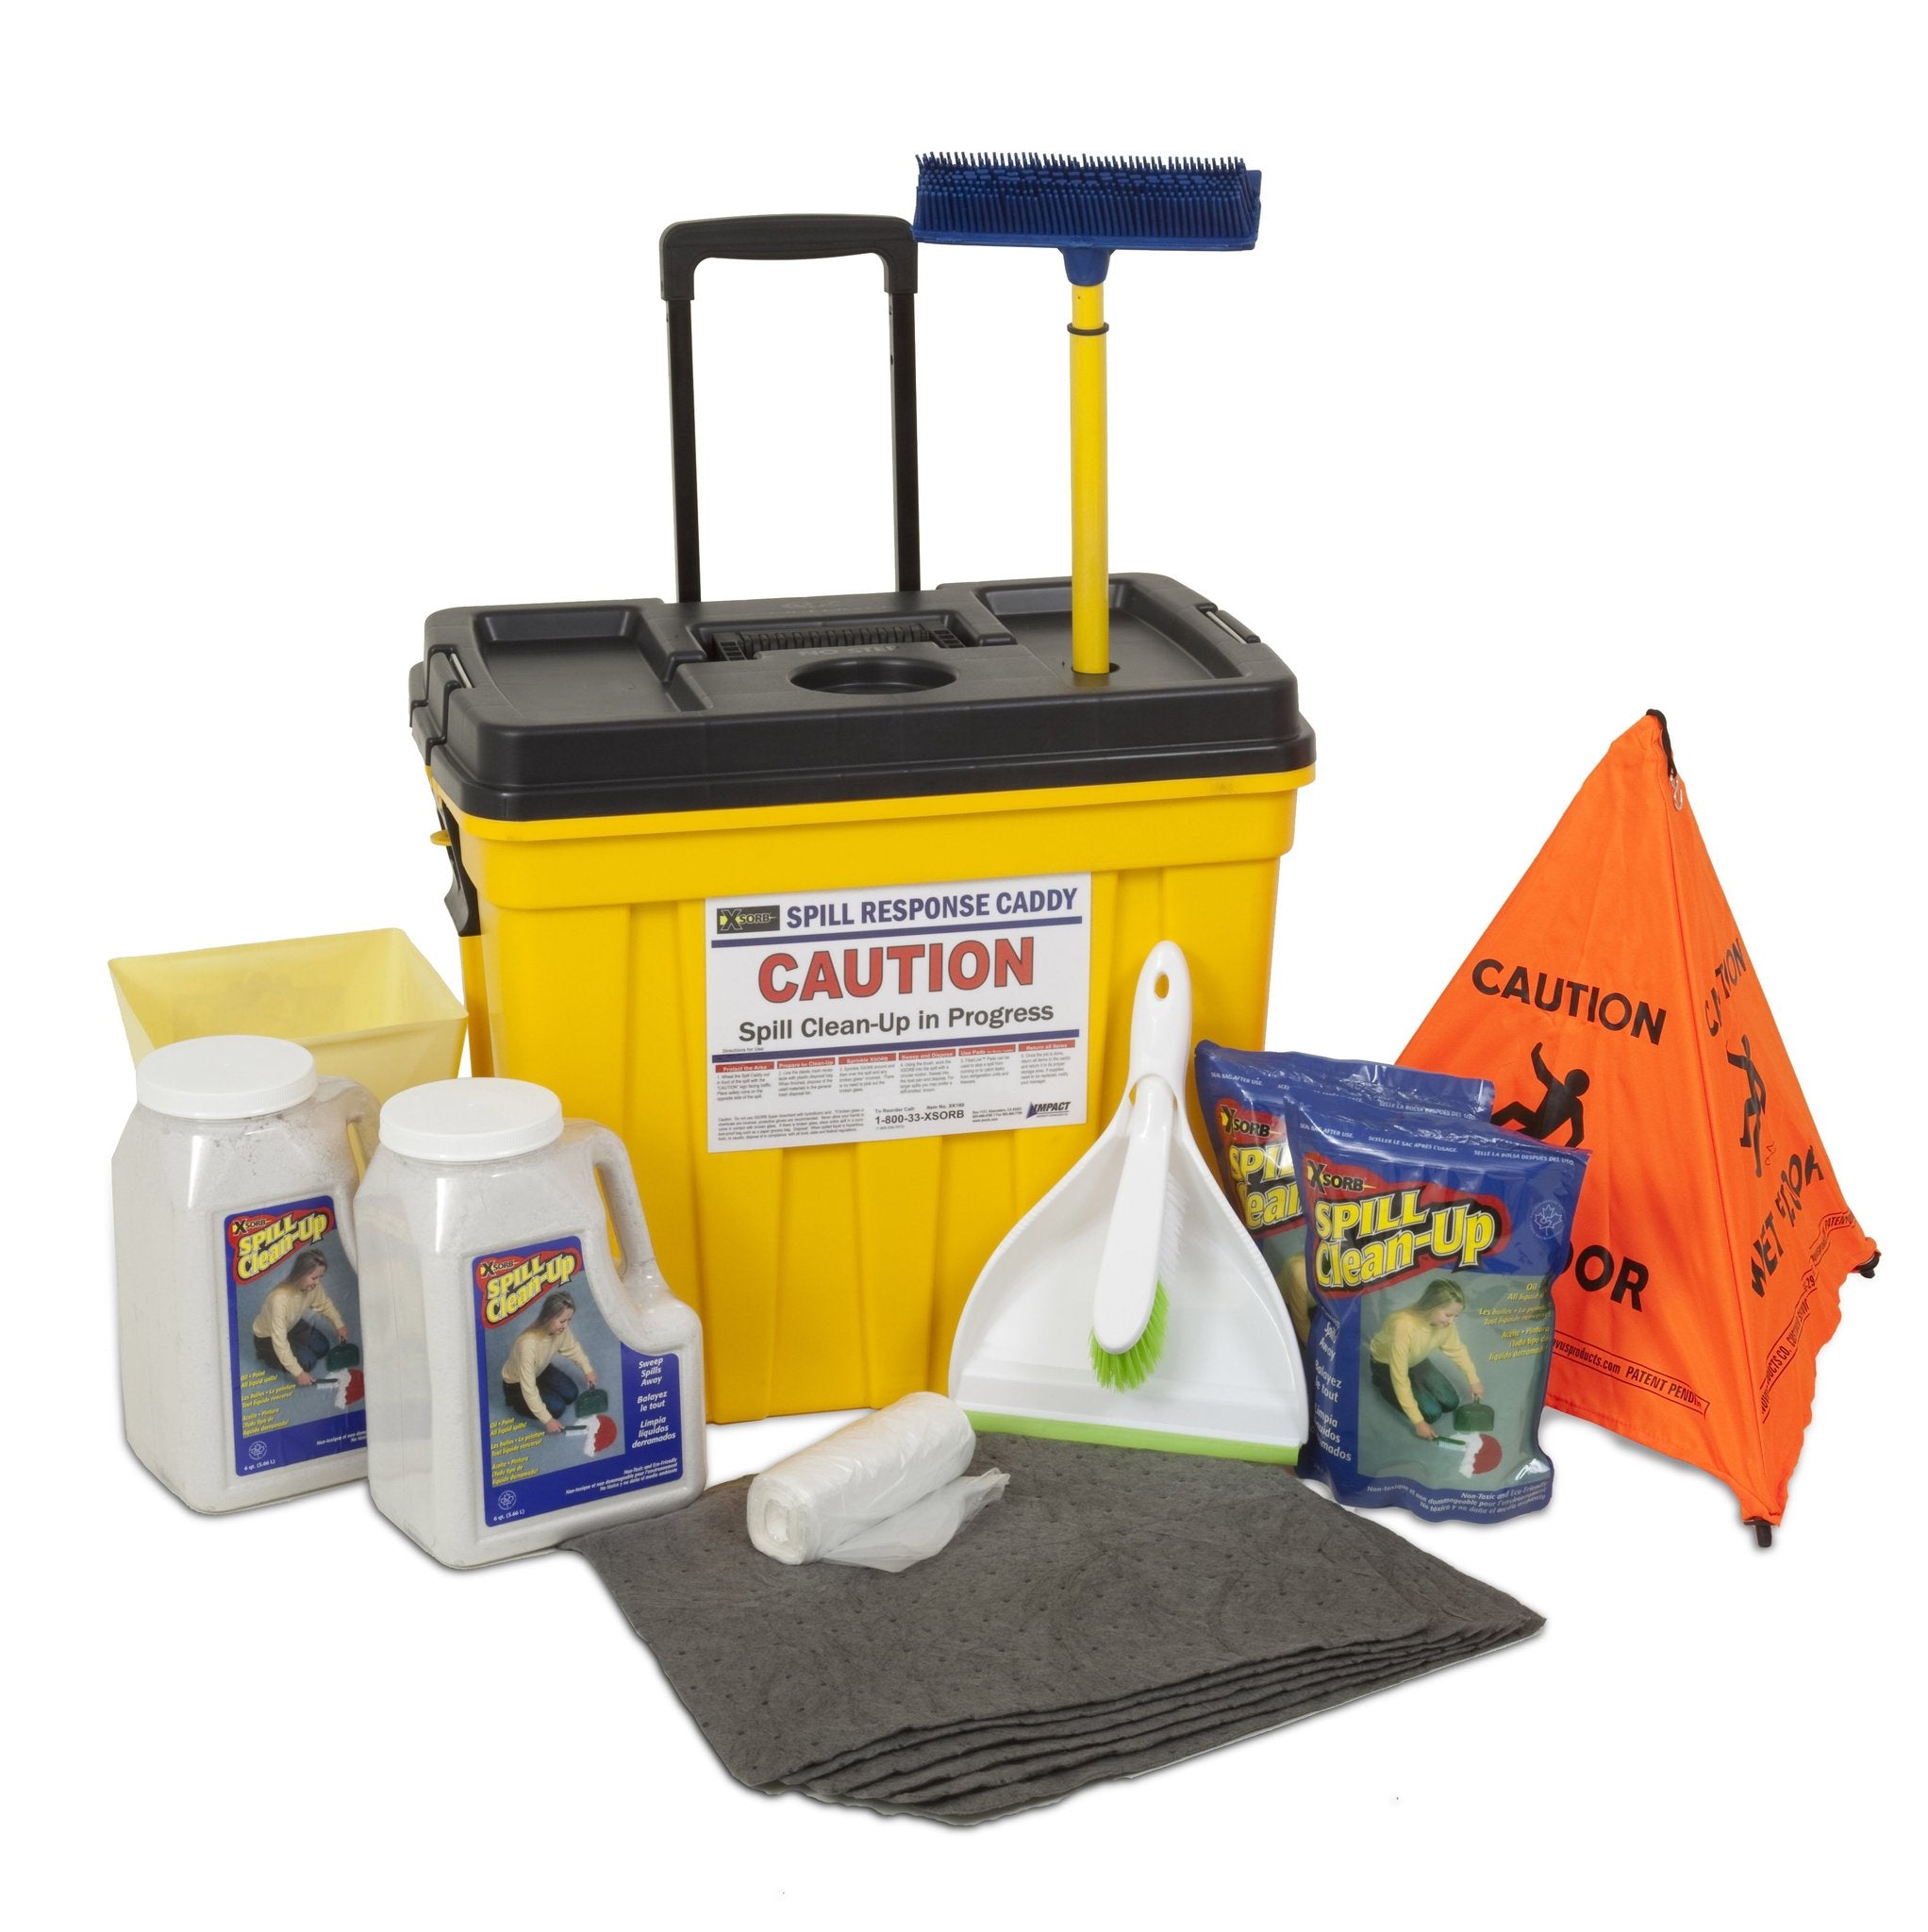 XSORB Spill Caddy Complete - 1 CADDY-eSafety Supplies, Inc